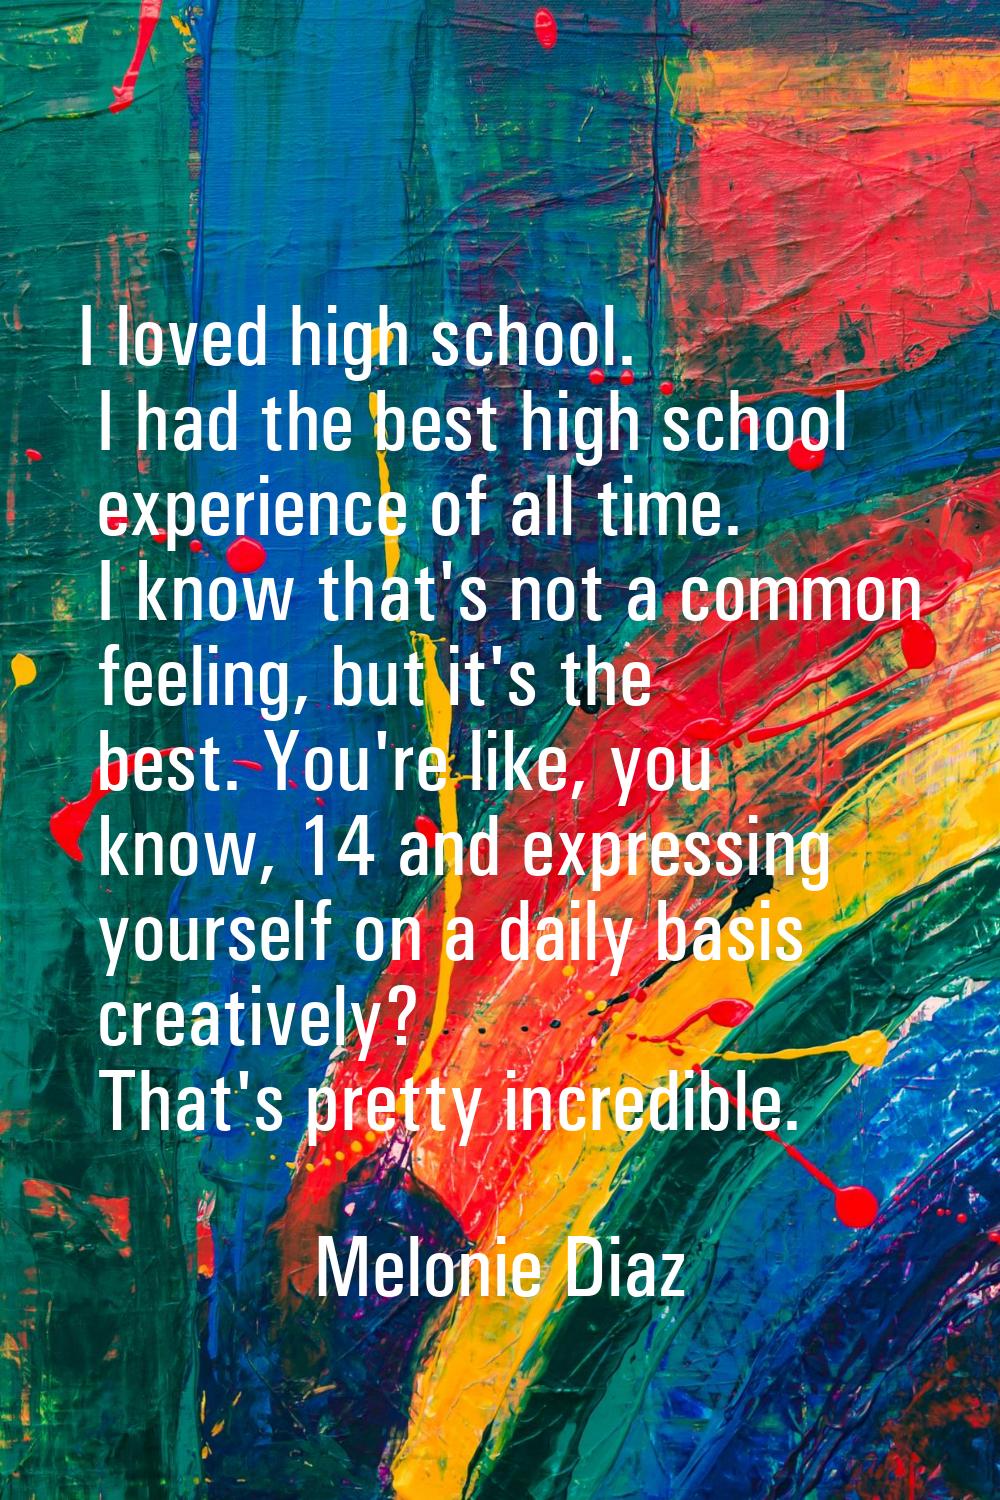 I loved high school. I had the best high school experience of all time. I know that's not a common 